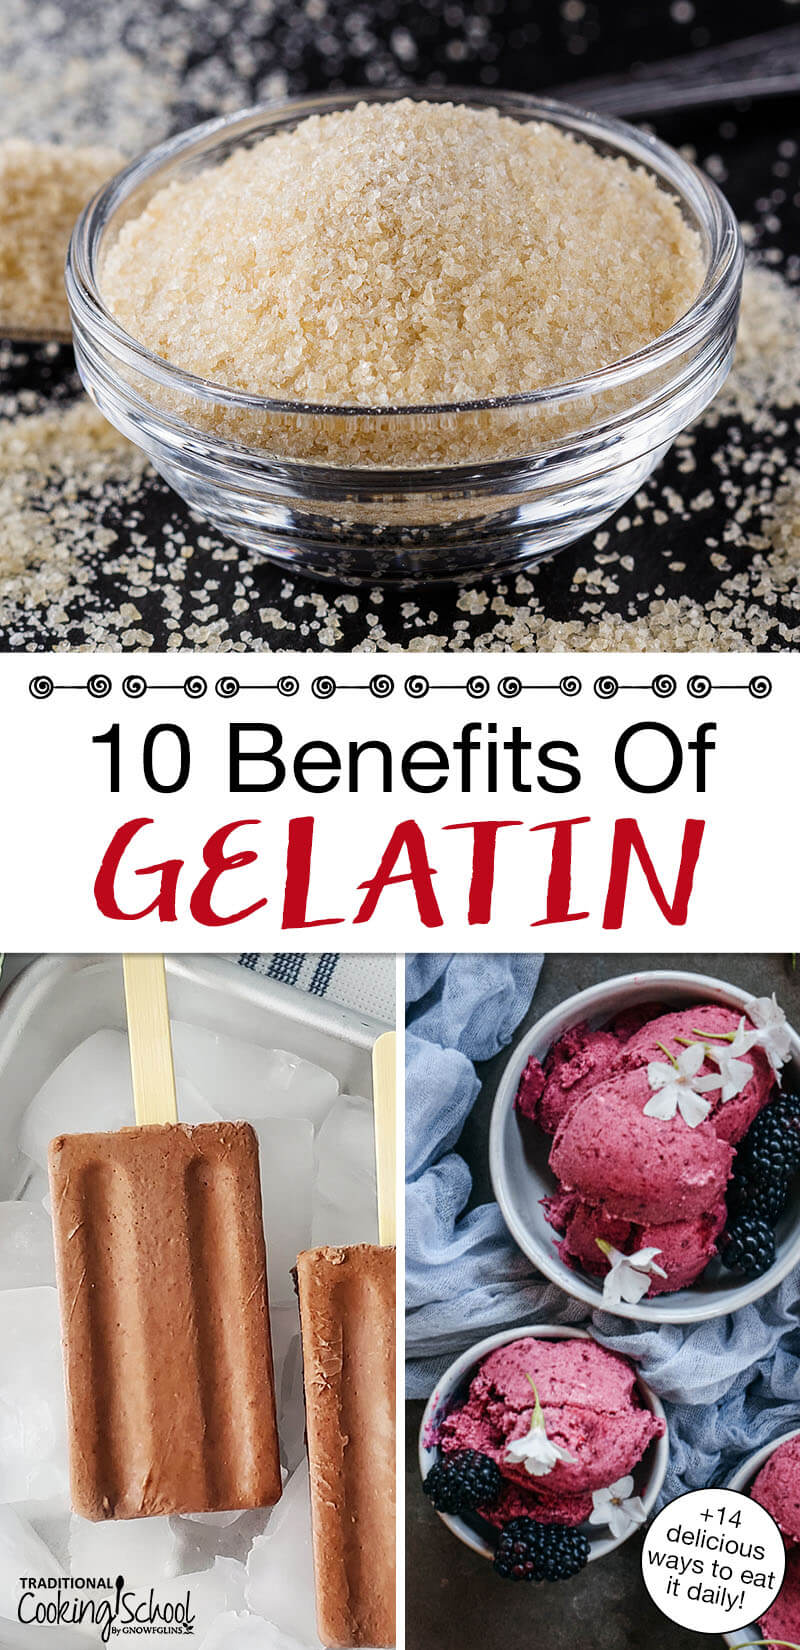 Photo collage of powdered gelatin and recipes that call for gelatin, including blackberry ice cream and dairy-free fudge pops. Text overlay says: "10 Benefits of Gelatin (+14 delicious ways to eat it daily!)"